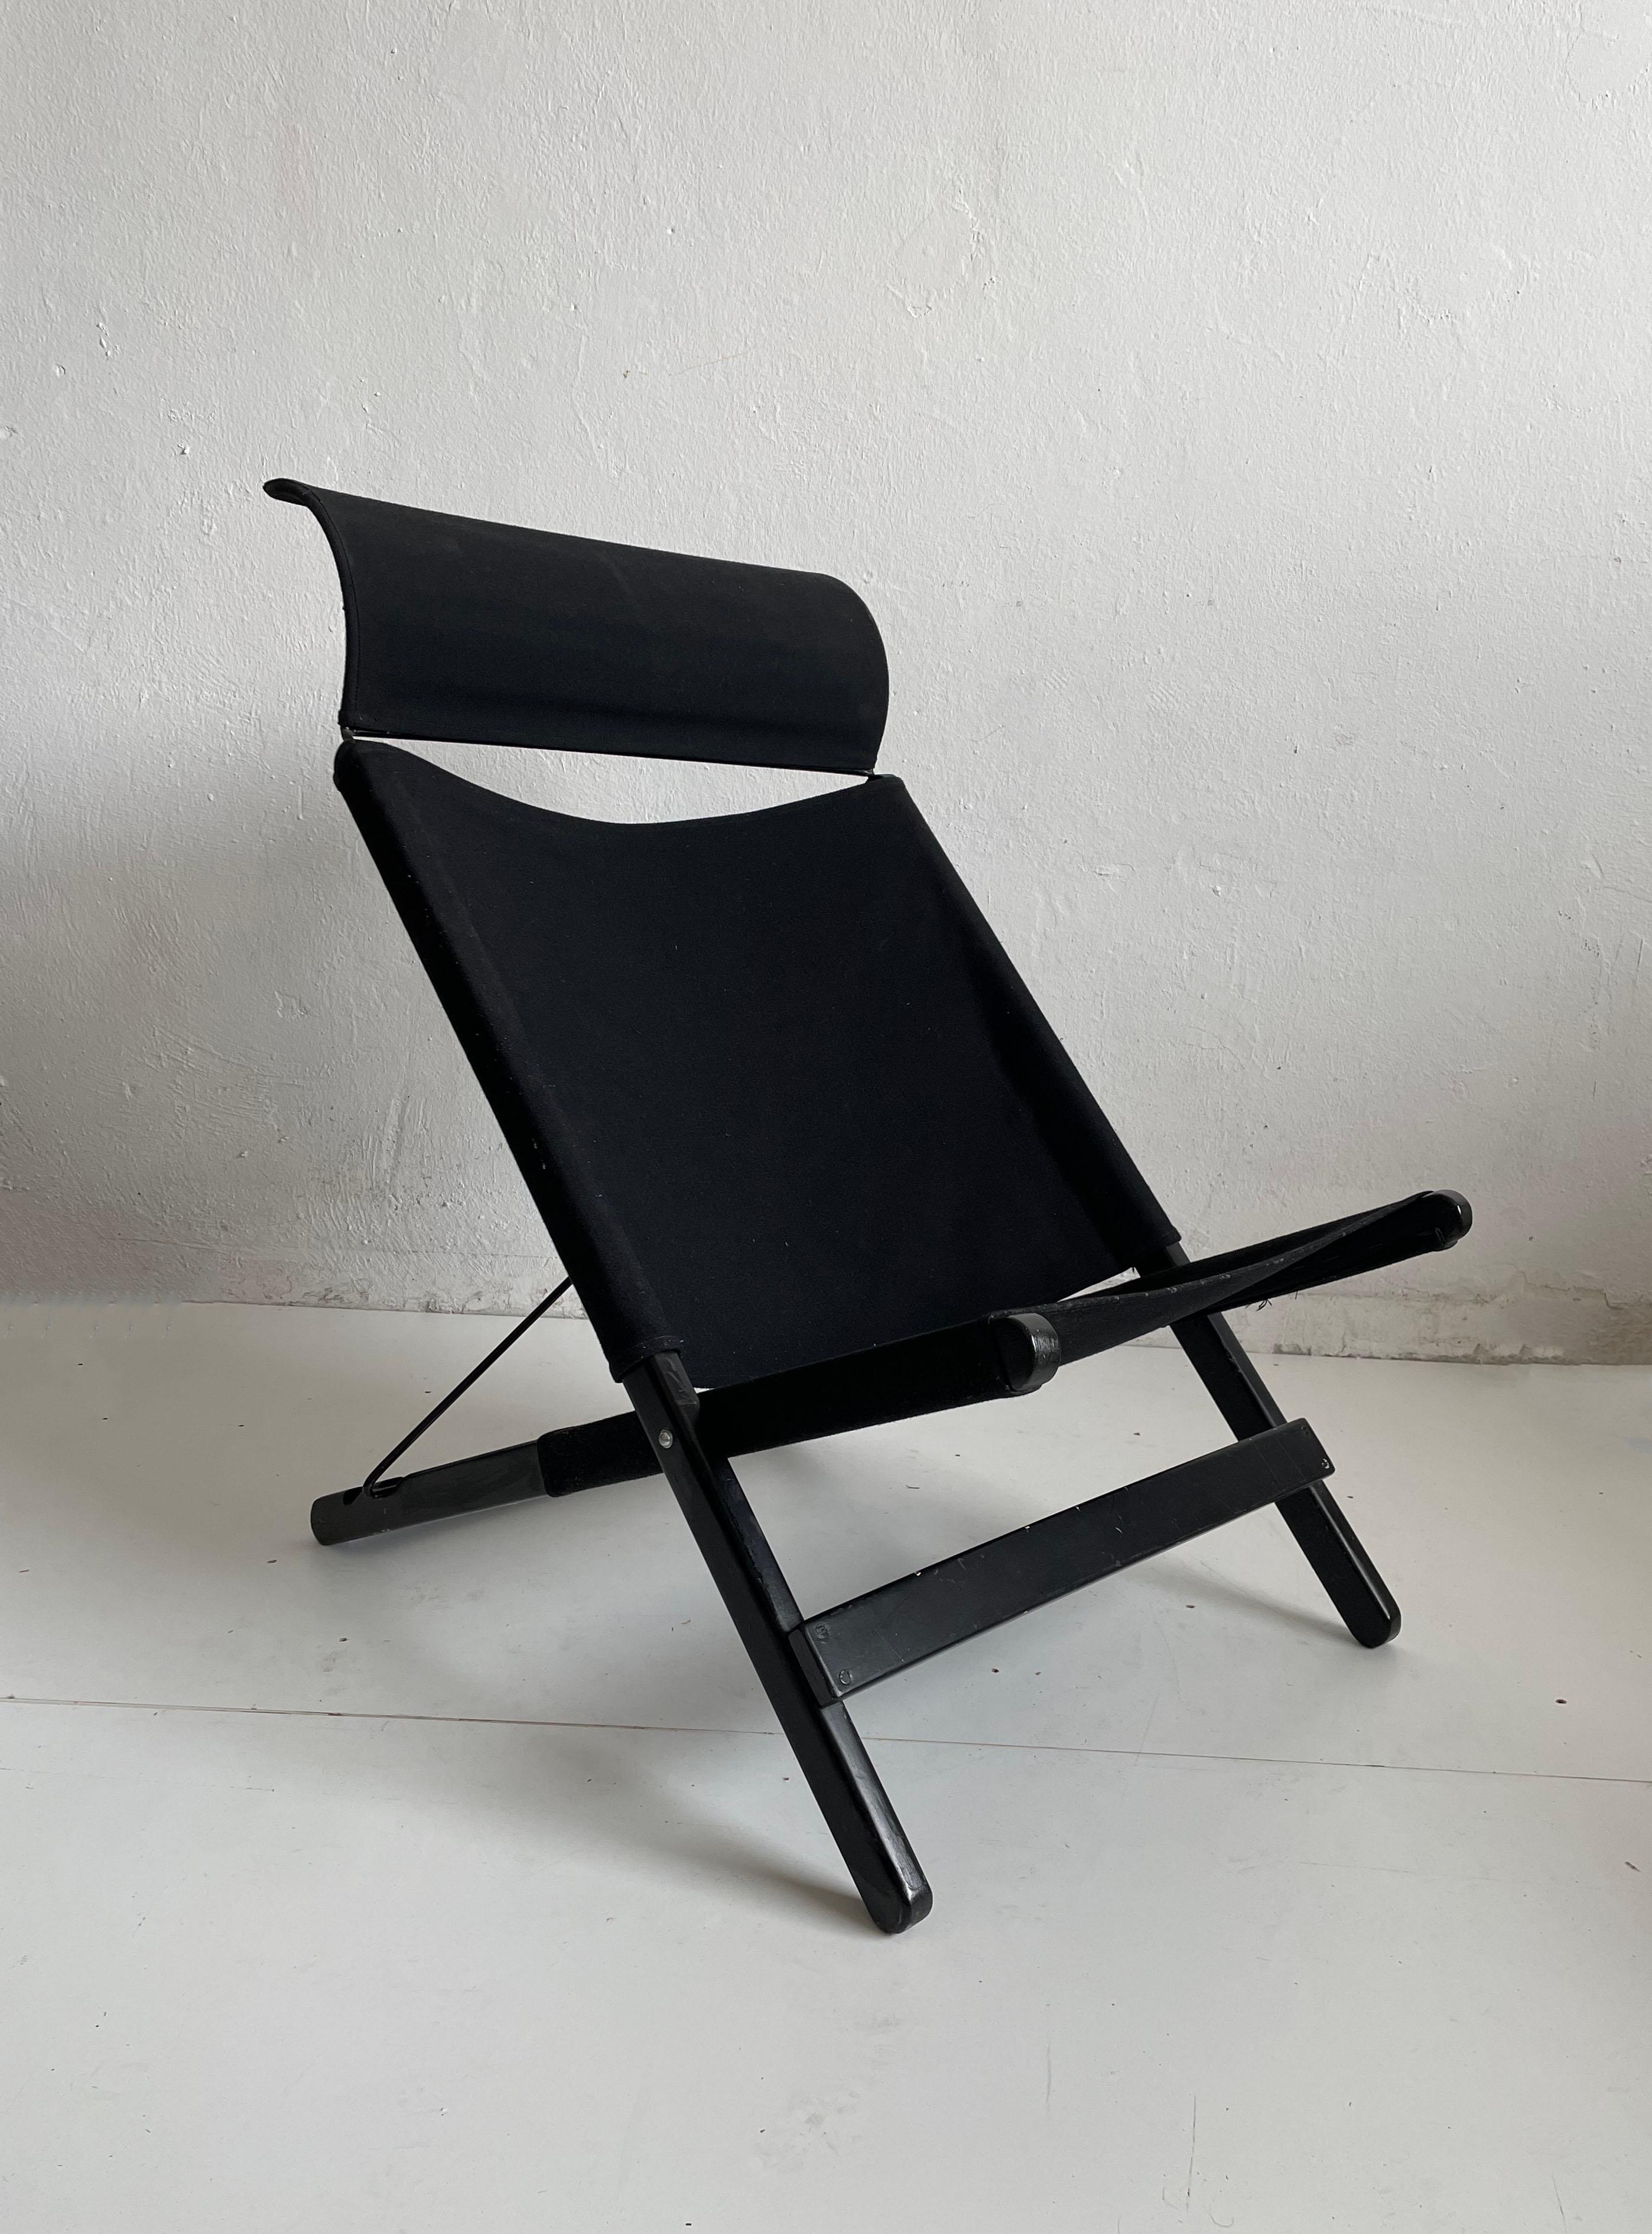 Metal Hestra Postmodern Folding Lounge Chair by Tord Björklund for IKEA, Sweden 1990s For Sale